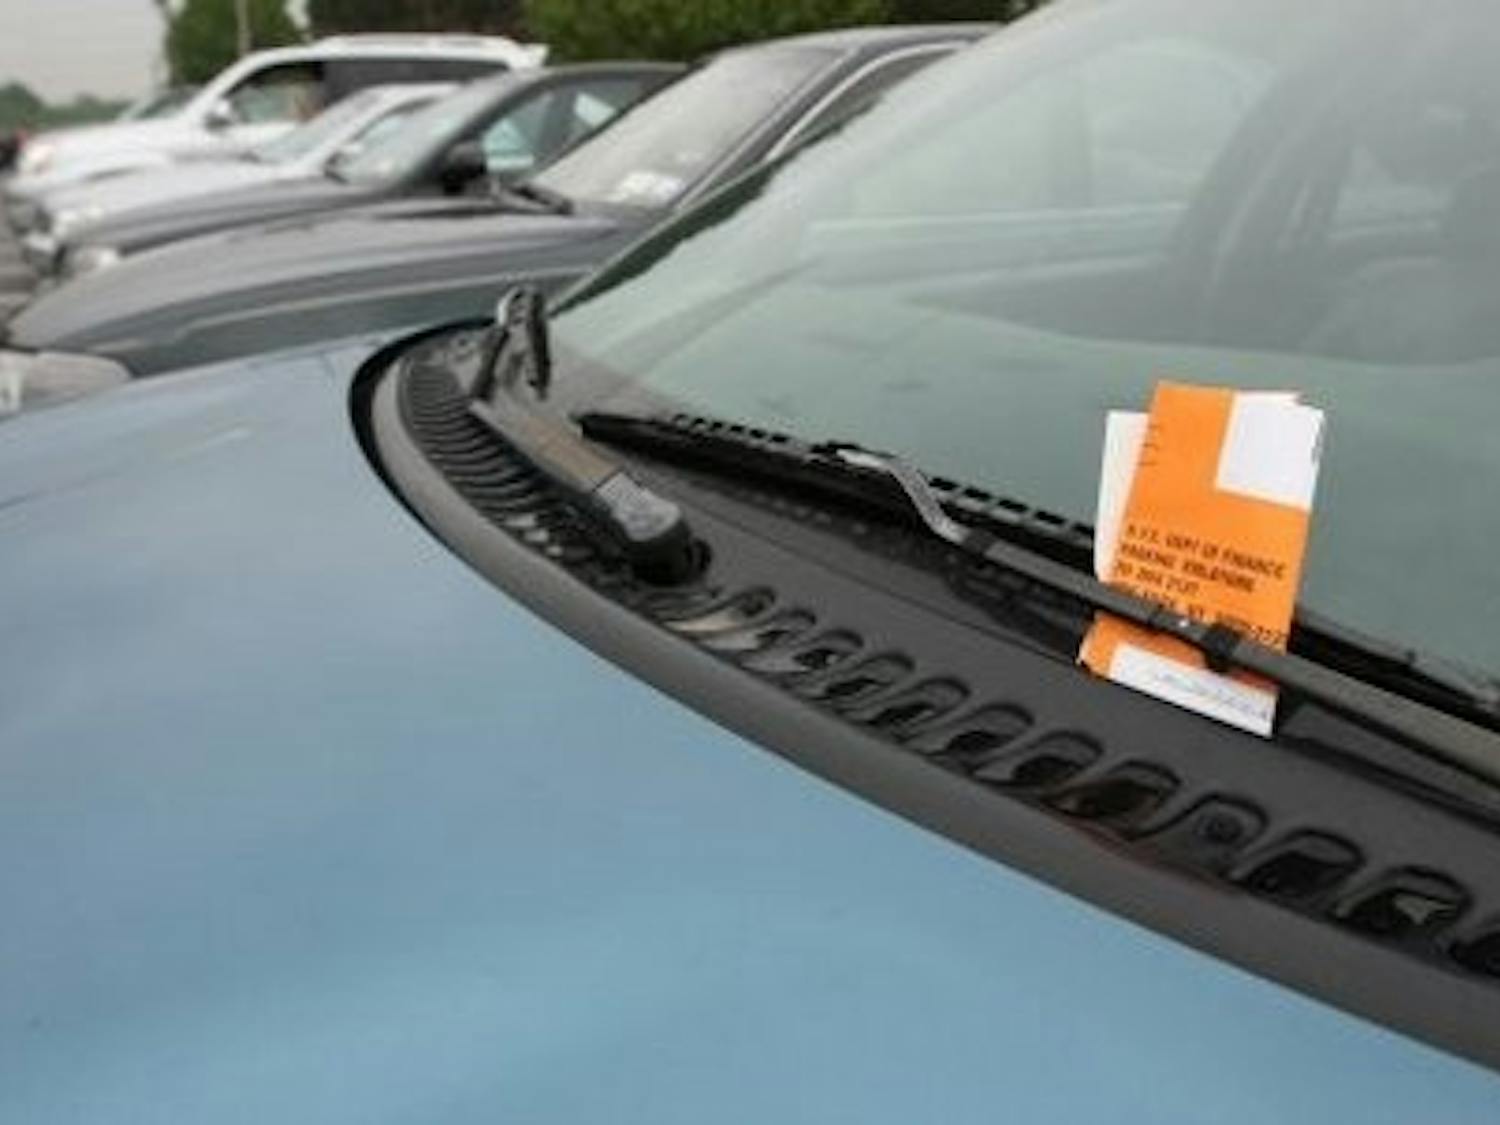 Car with Parking Ticket